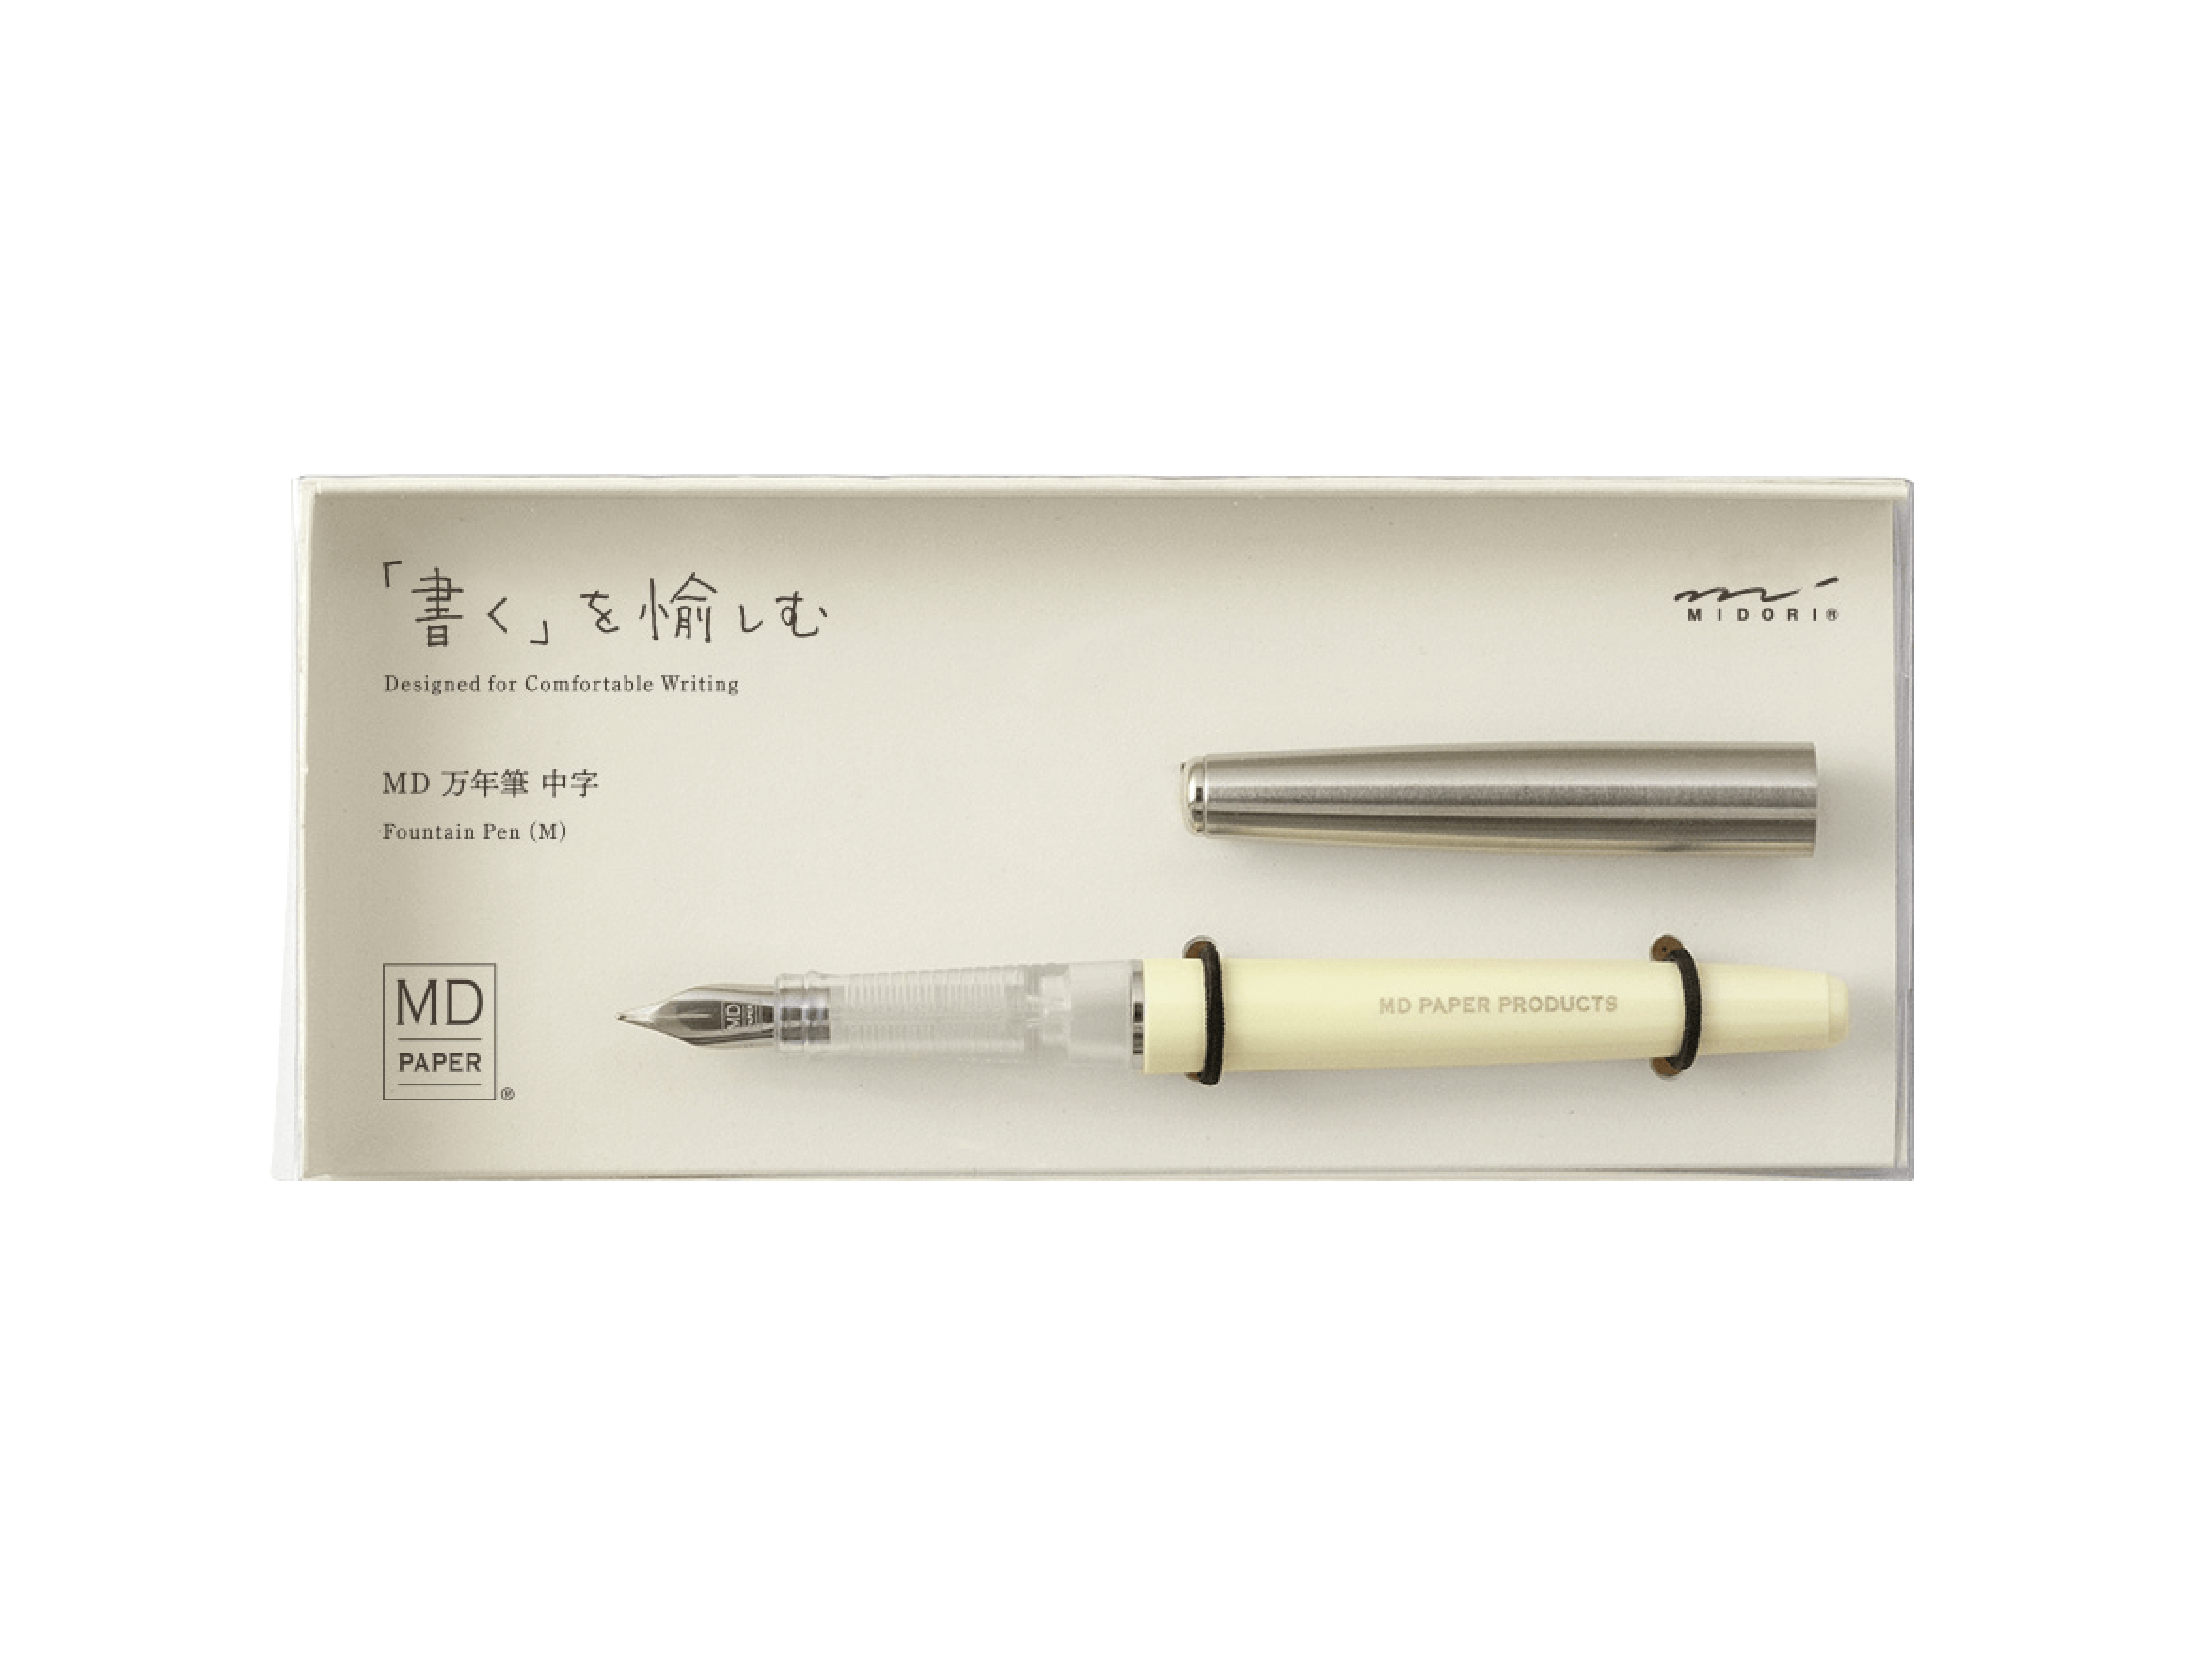 The Best Pen Is Made by Midori